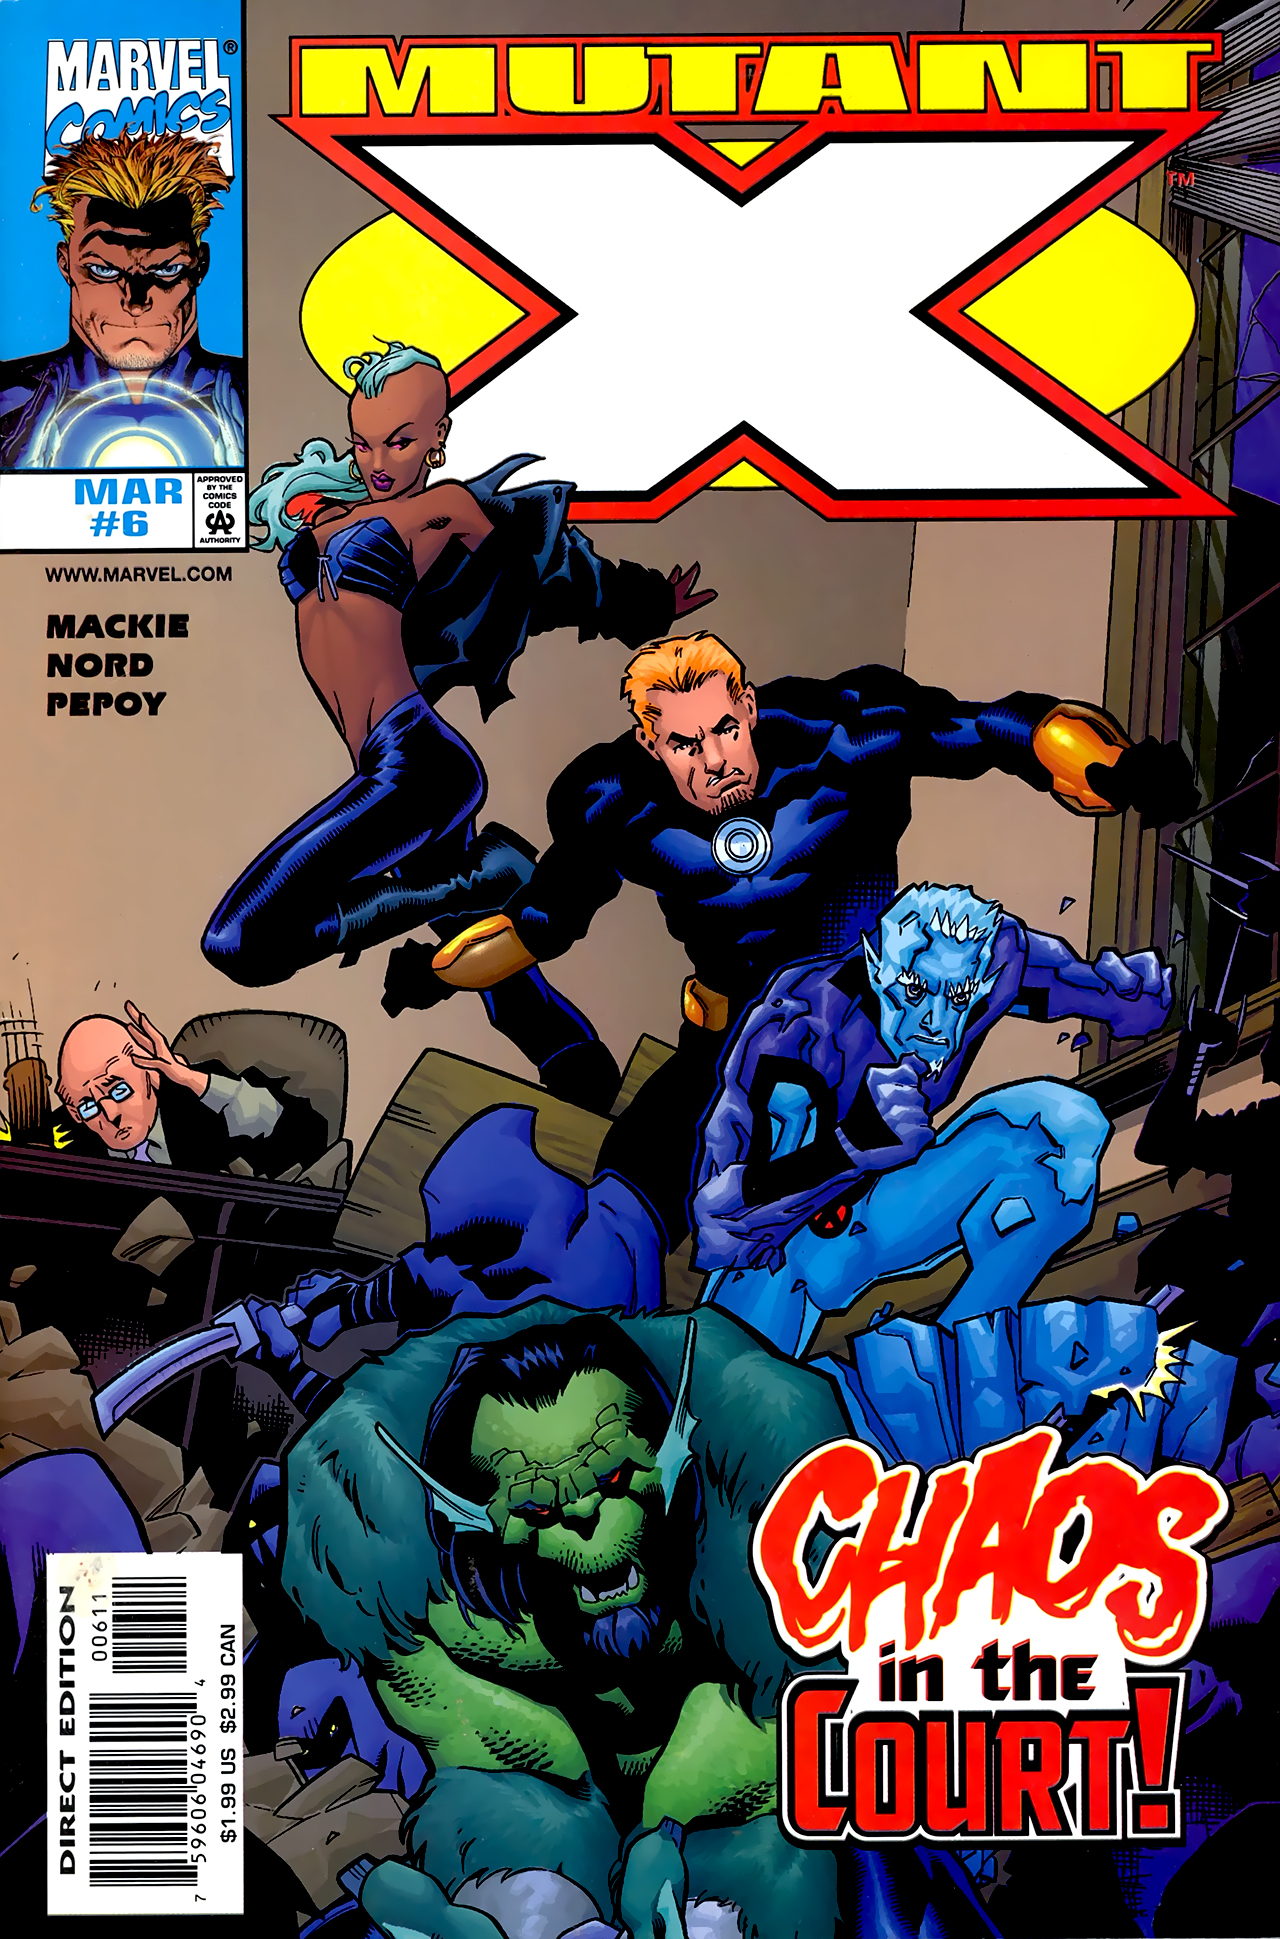 Read online Mutant X comic -  Issue #6 - 1